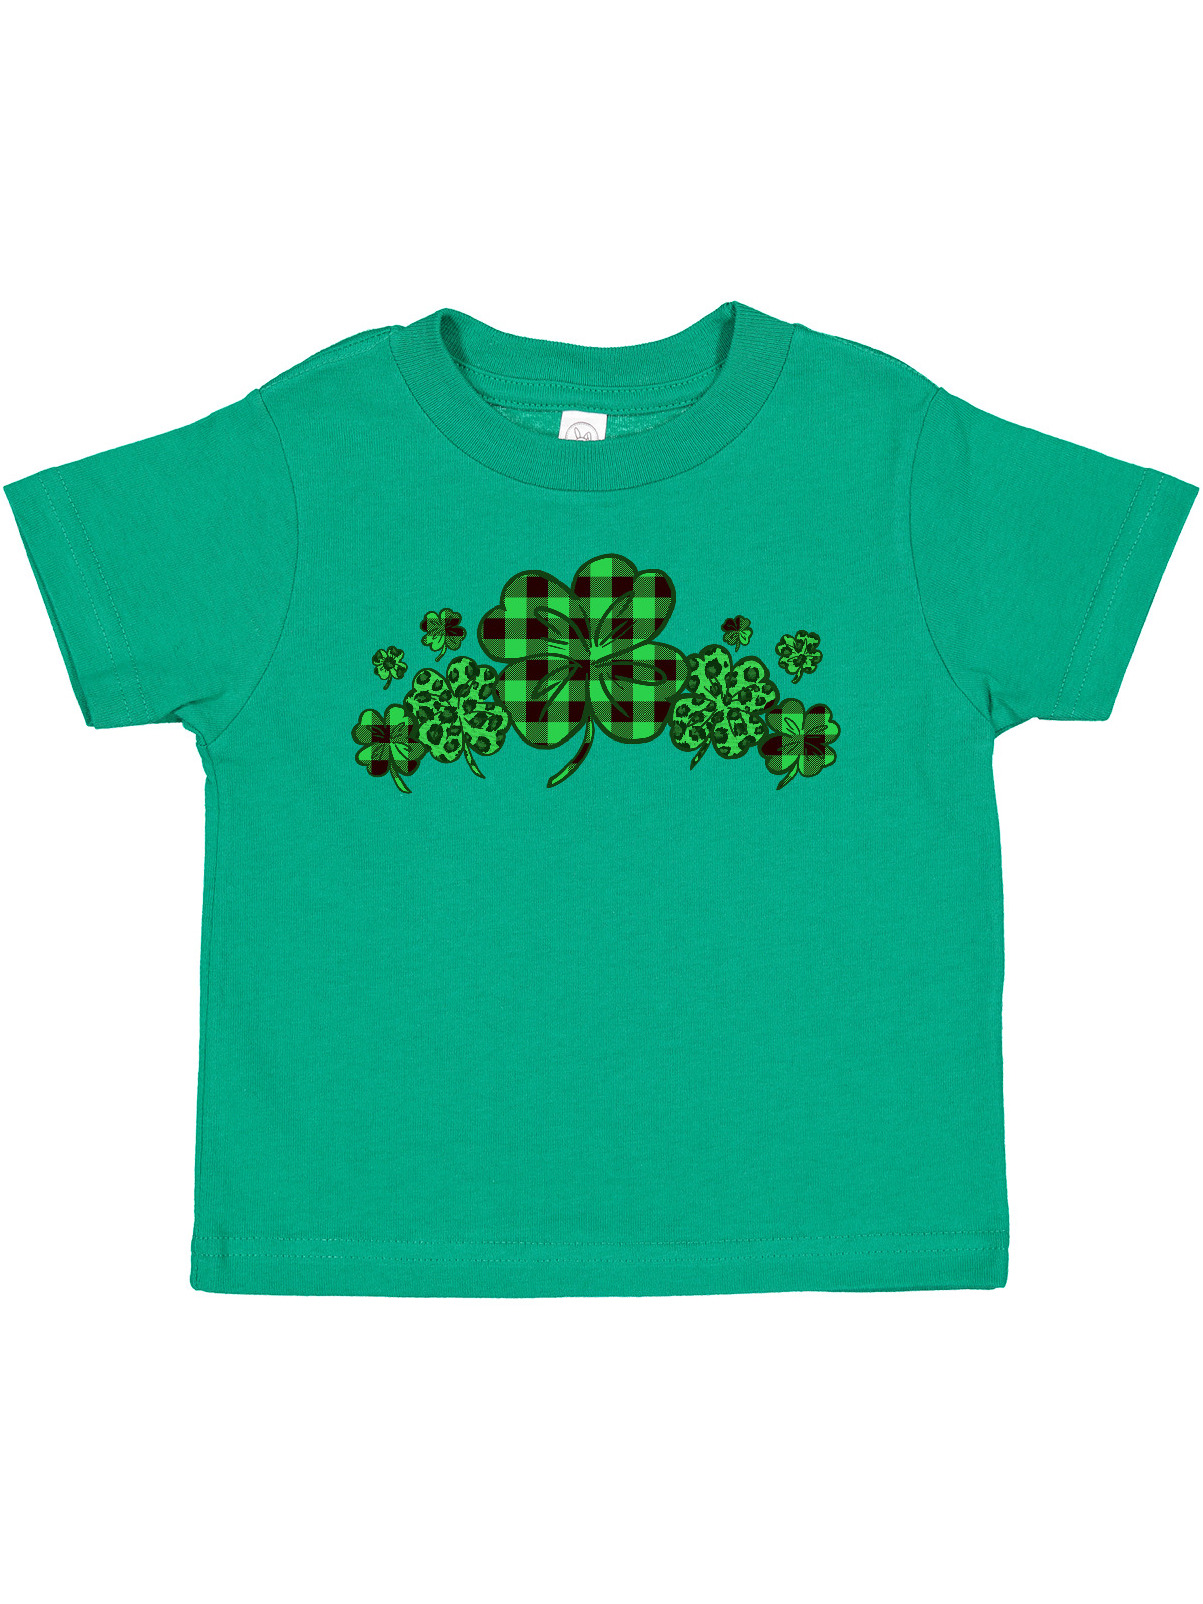 Inktastic St. Patrick's Day Clovers in Plaid Boys or Girls Toddler T-Shirt - image 1 of 4